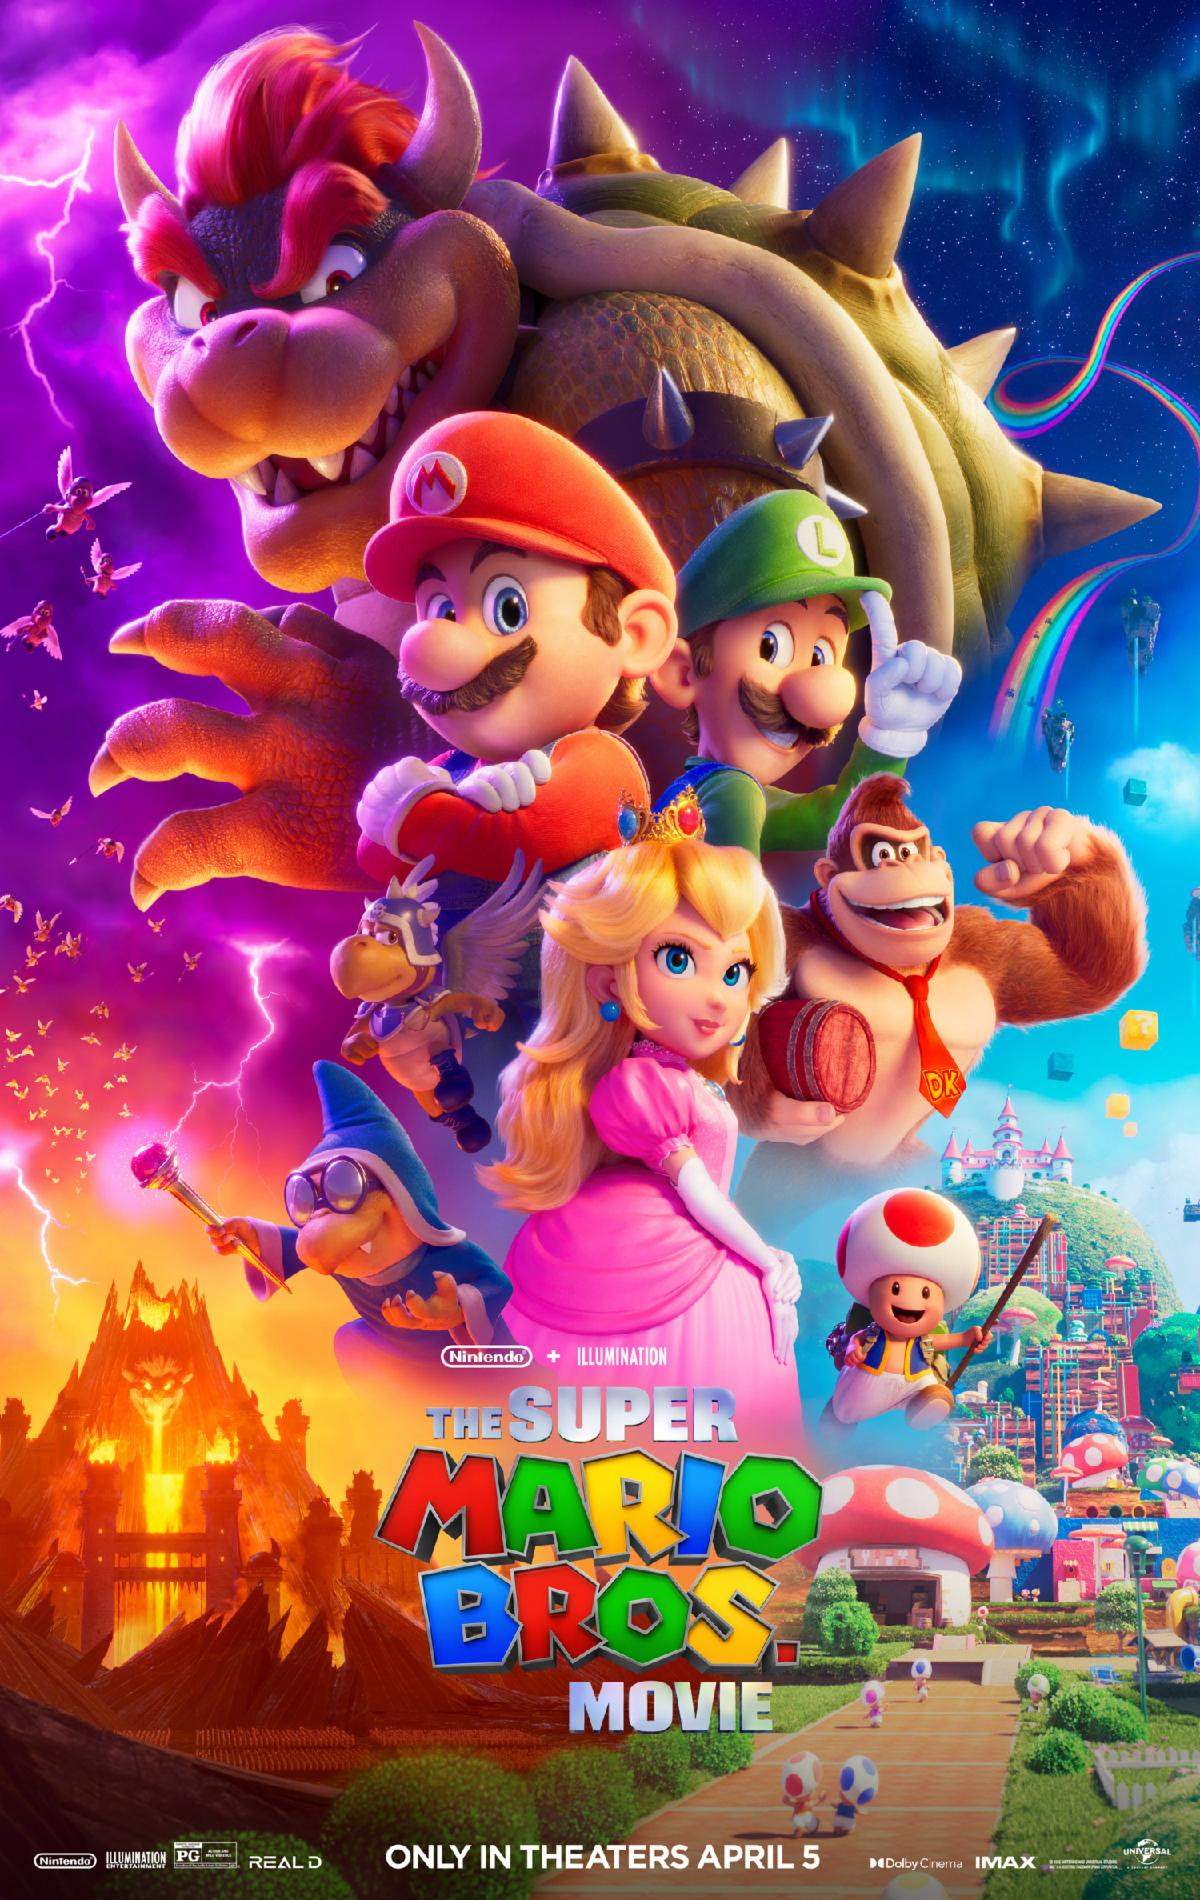 Movie and a Meal: The Super Mario Bros. Movie